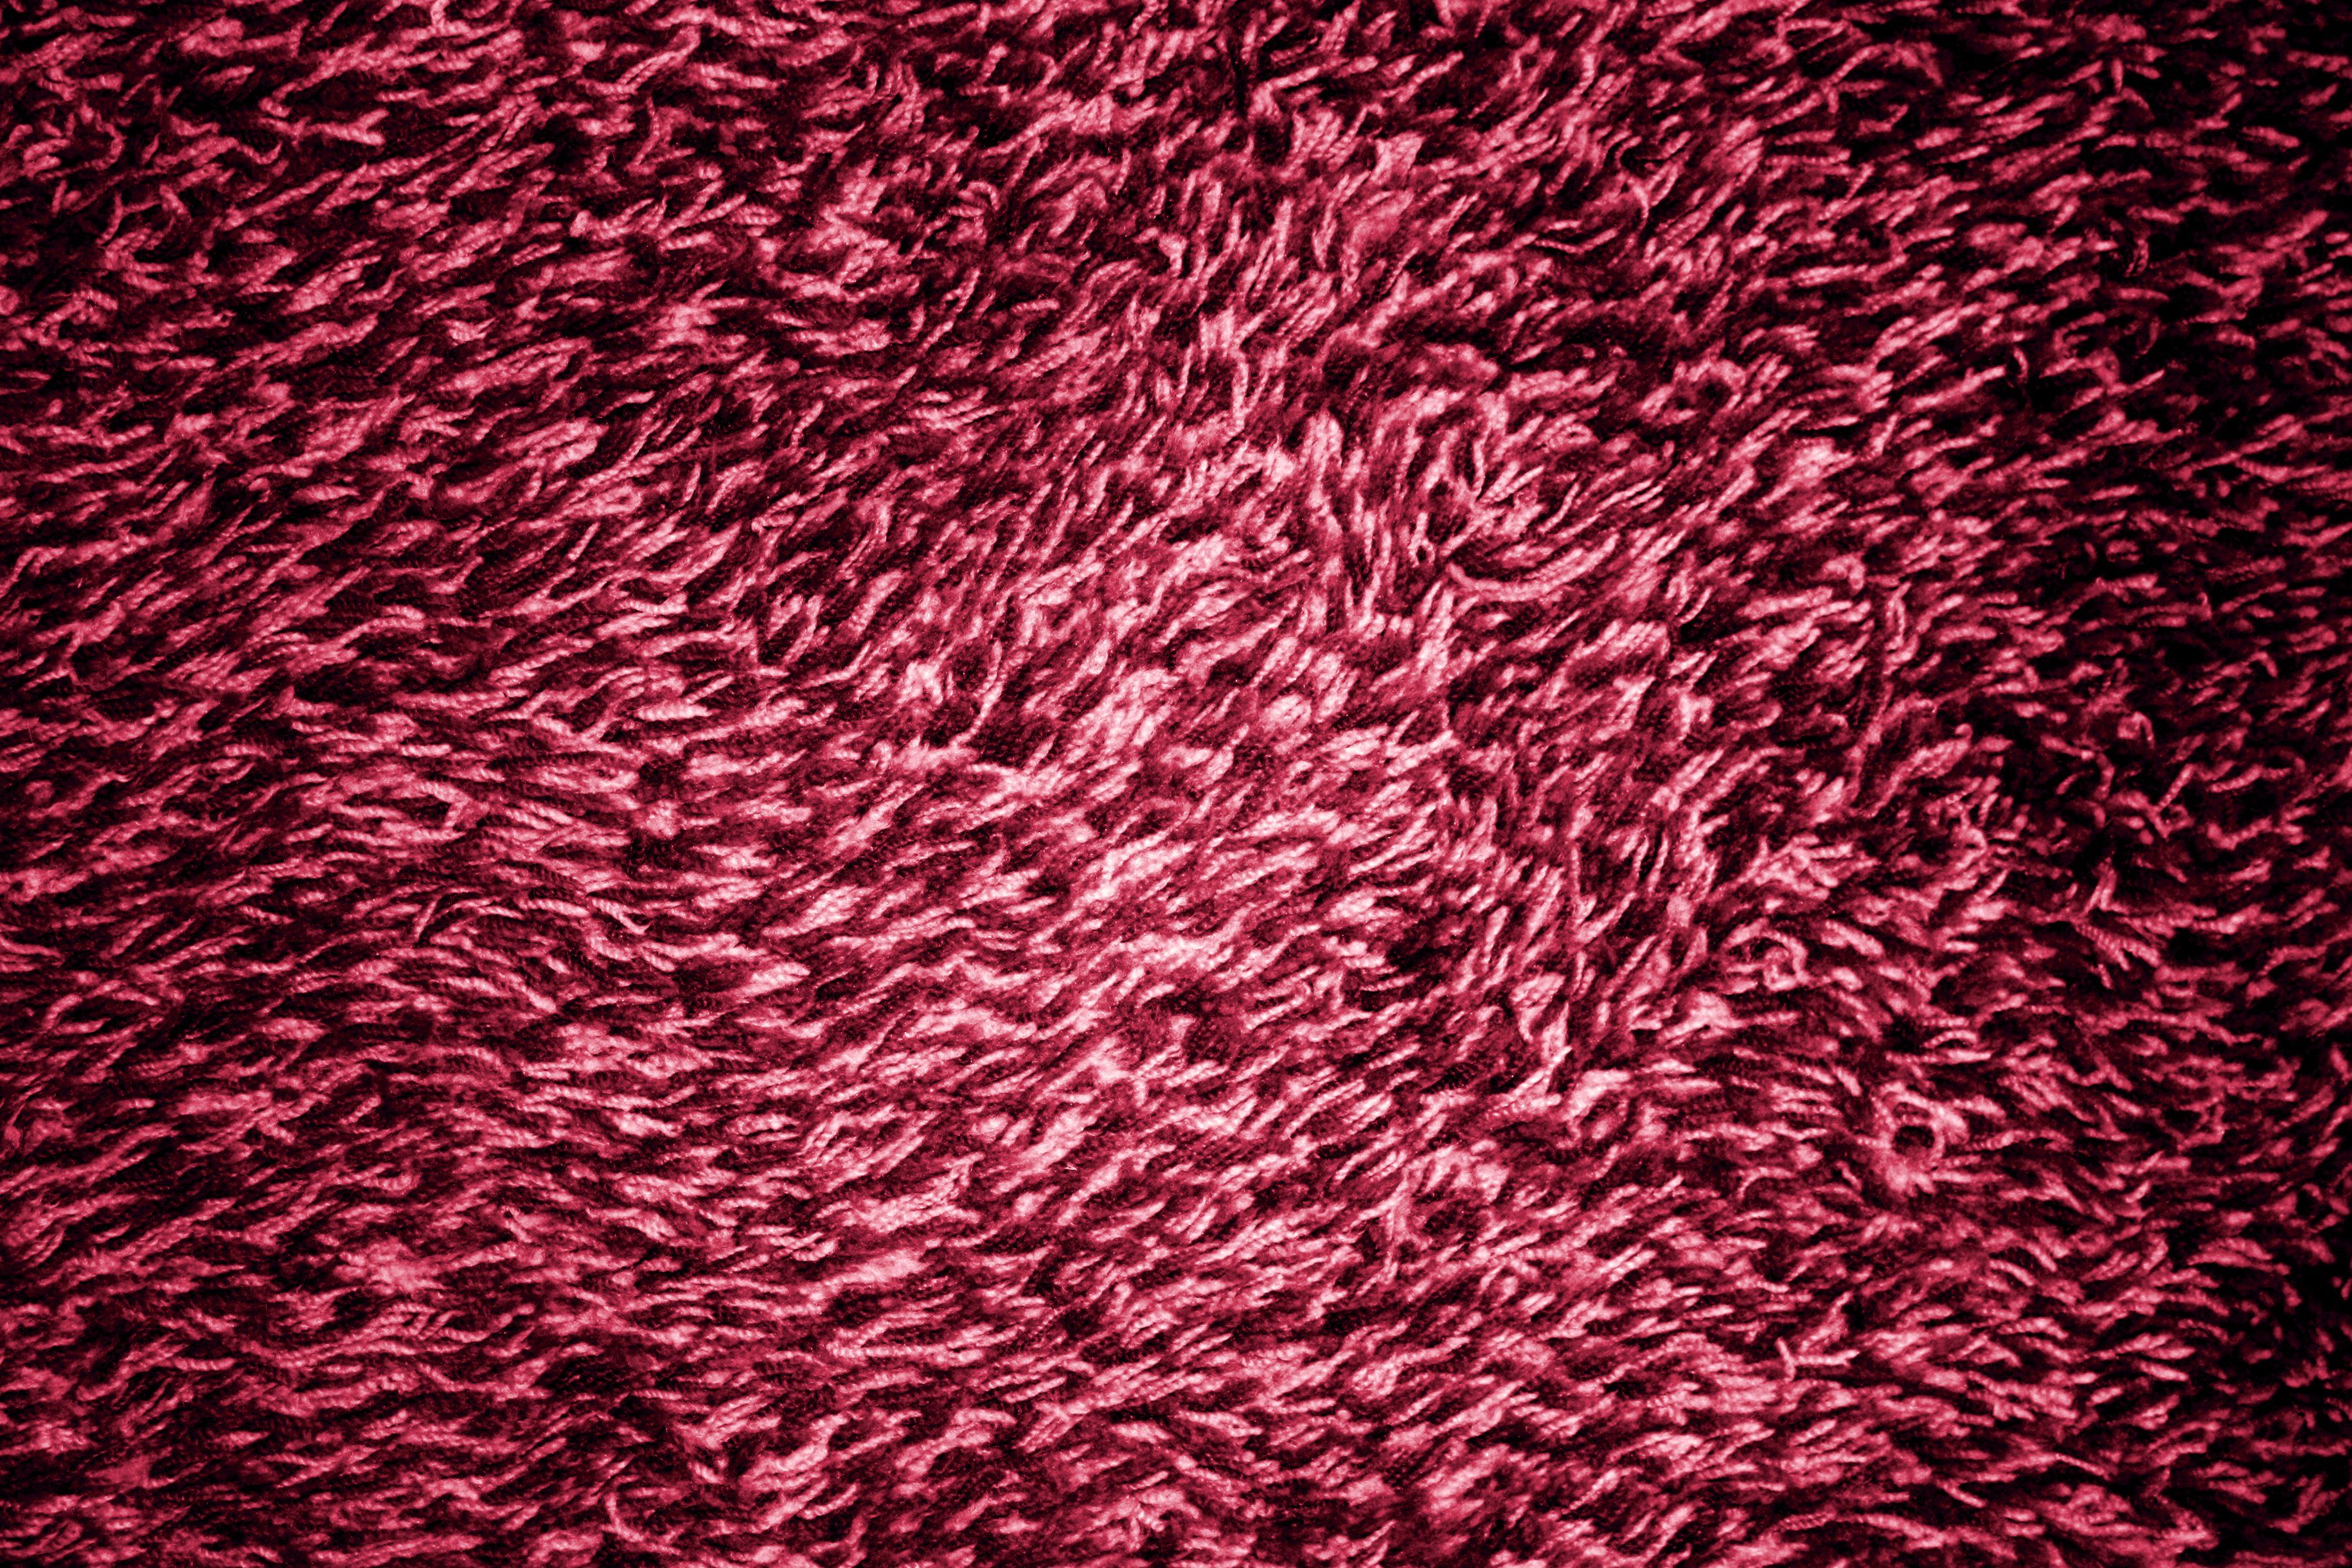 Magenta or Hot Pink Shag Carpeting Texture Picture. Free